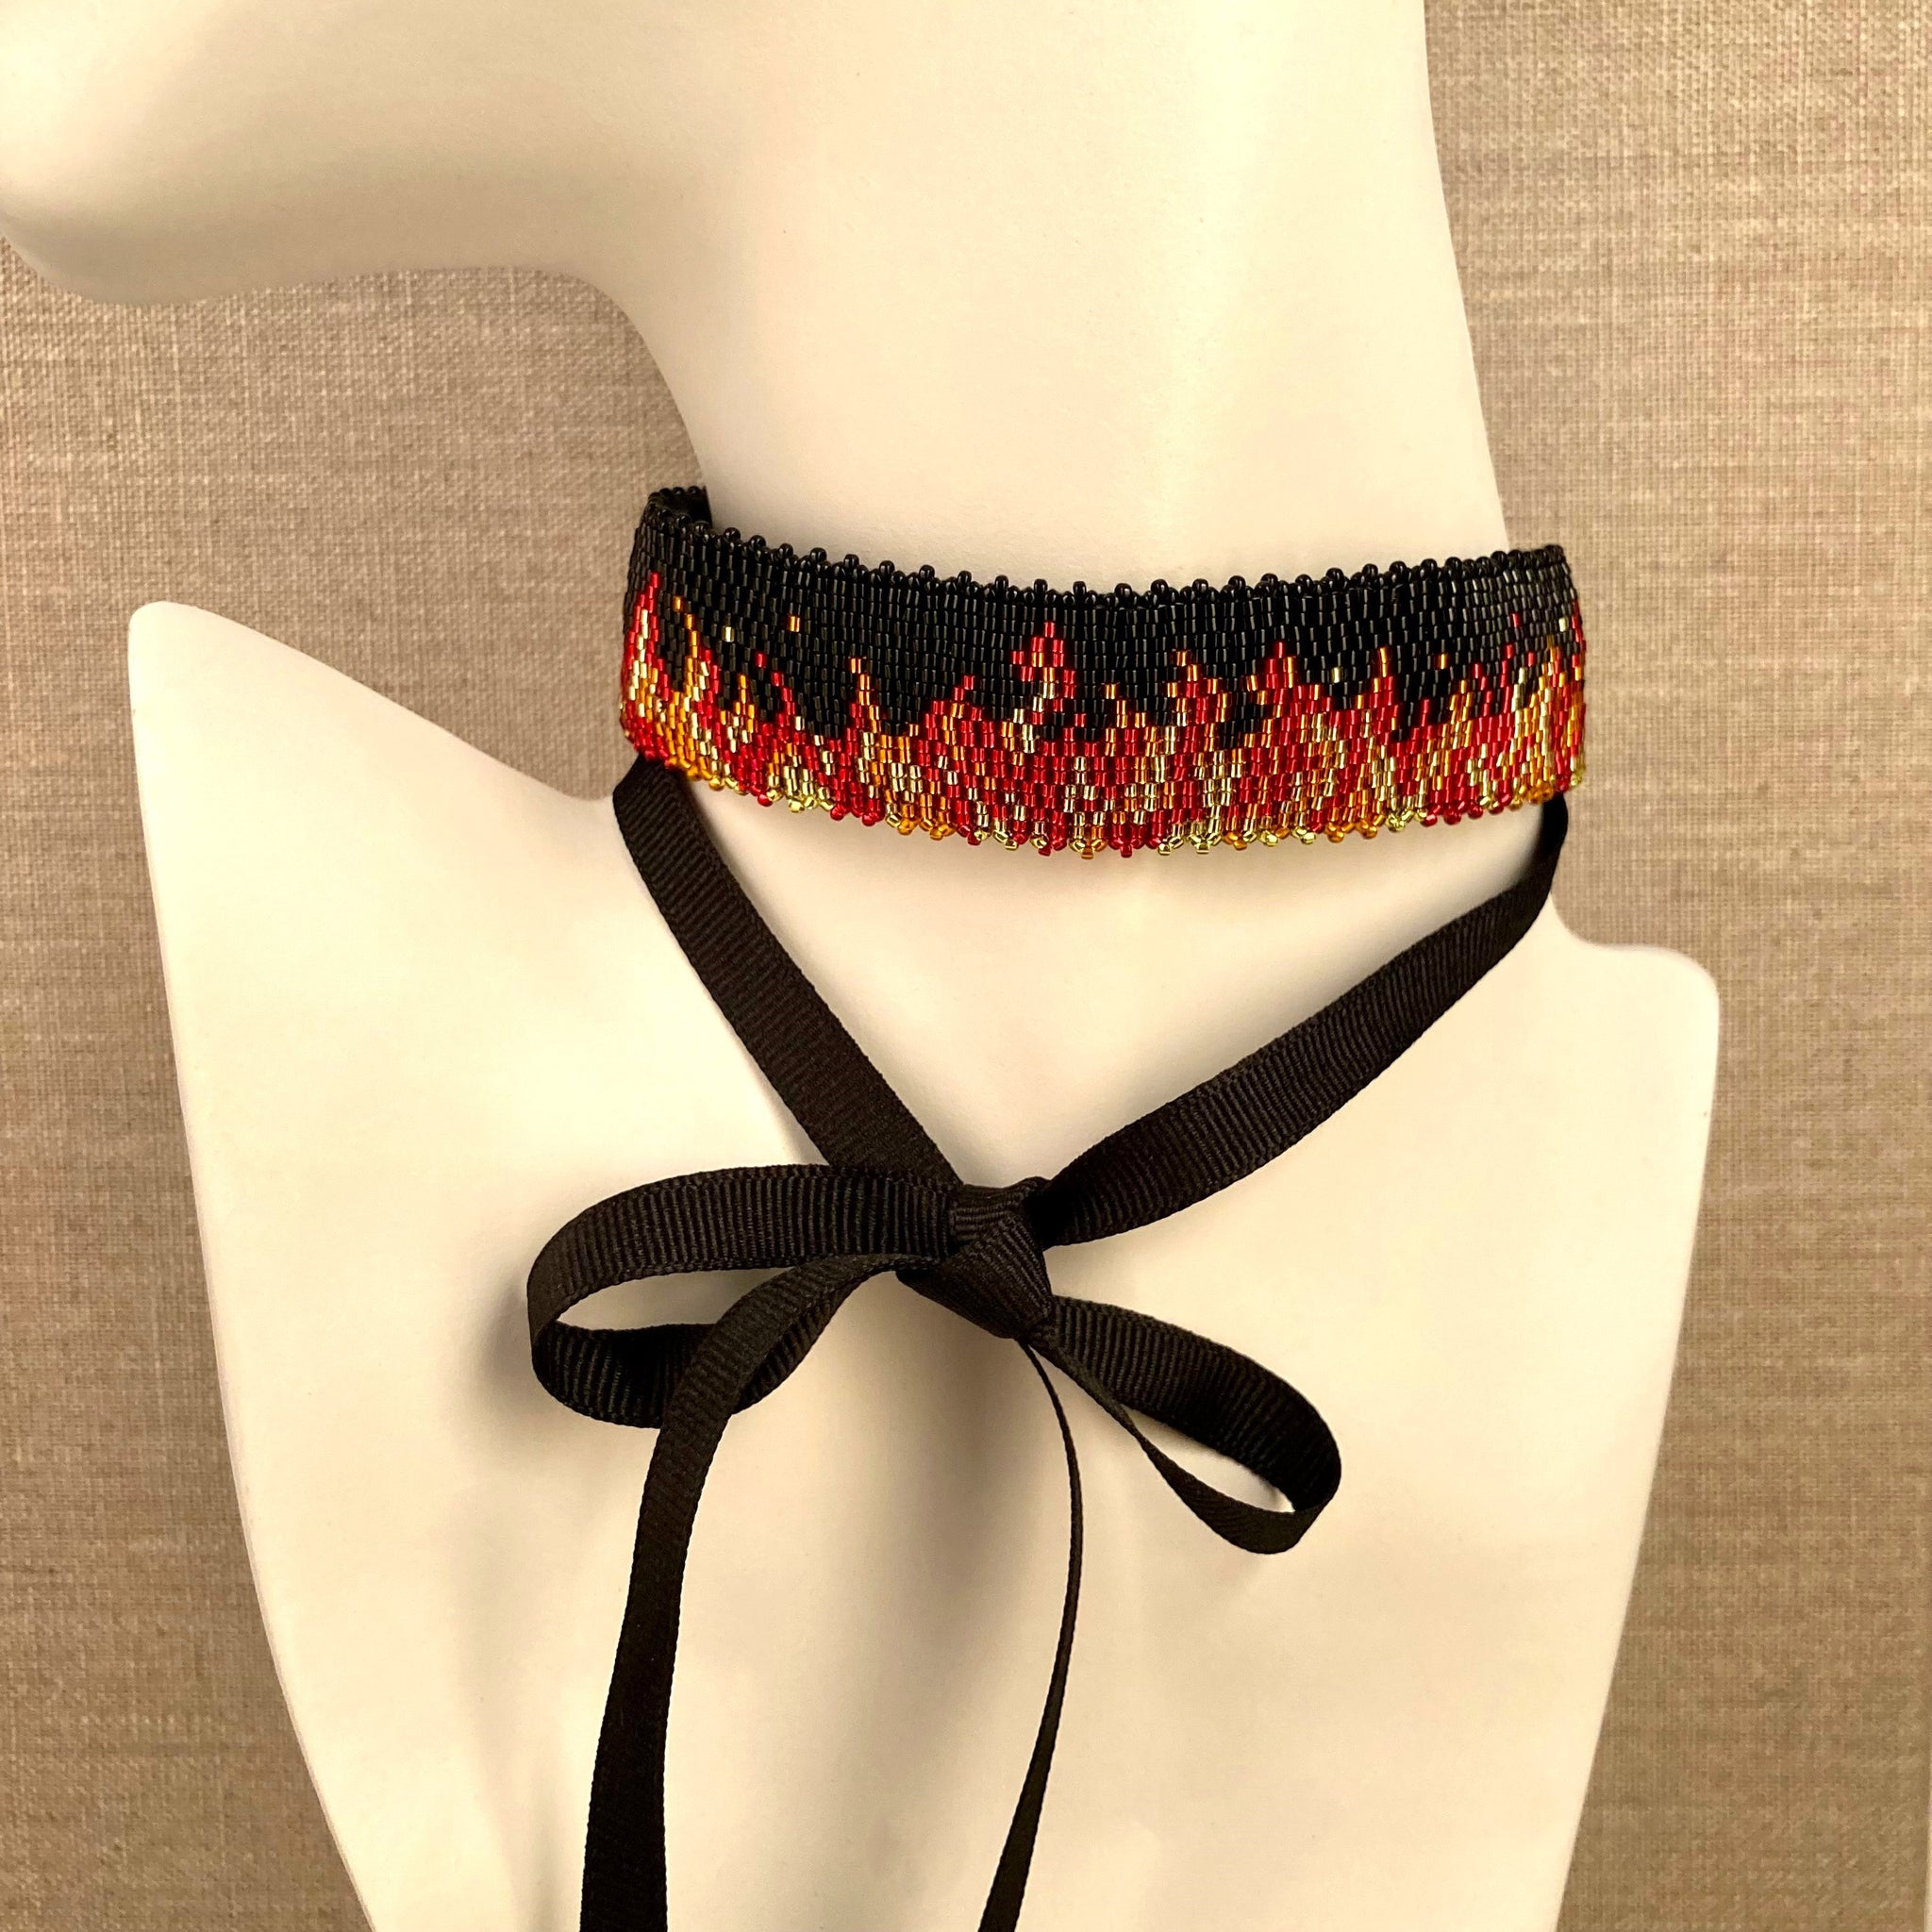 Fire Beaded Choker ribbon elegant sophisticated classy daring original design Vogue Couture lariat night club sexy one of a kind handmade Beaded By The Beach USA America made